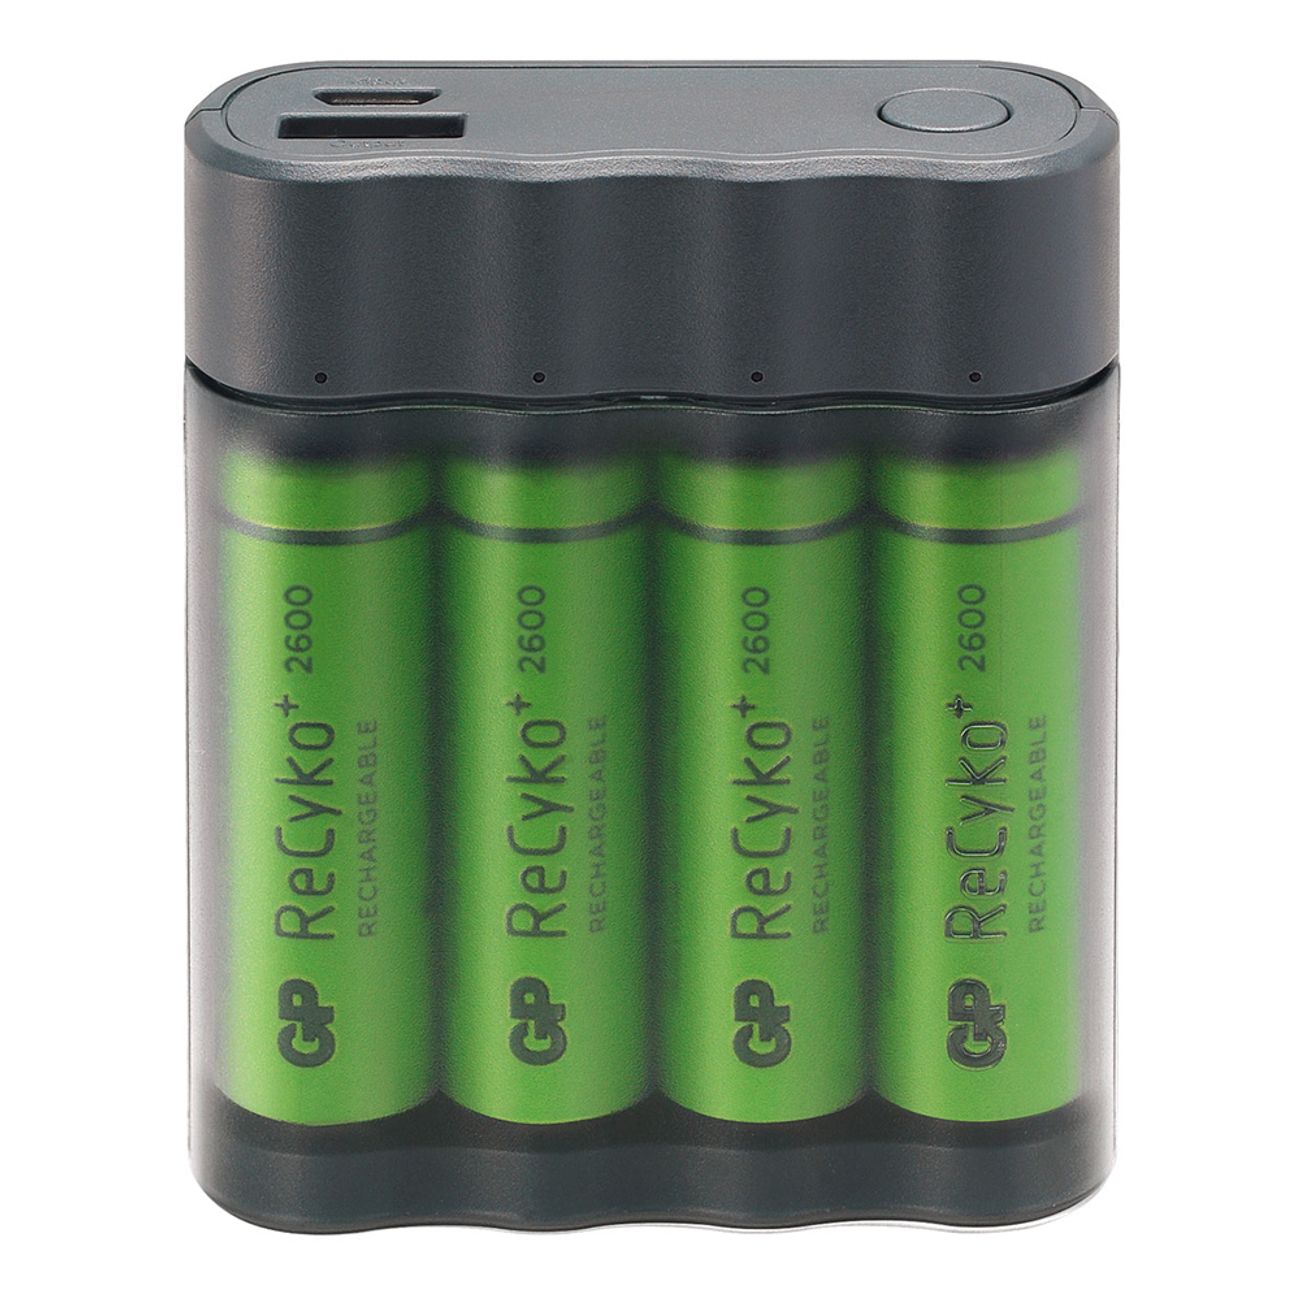 gp-charge-anyway-batteriladdare-1